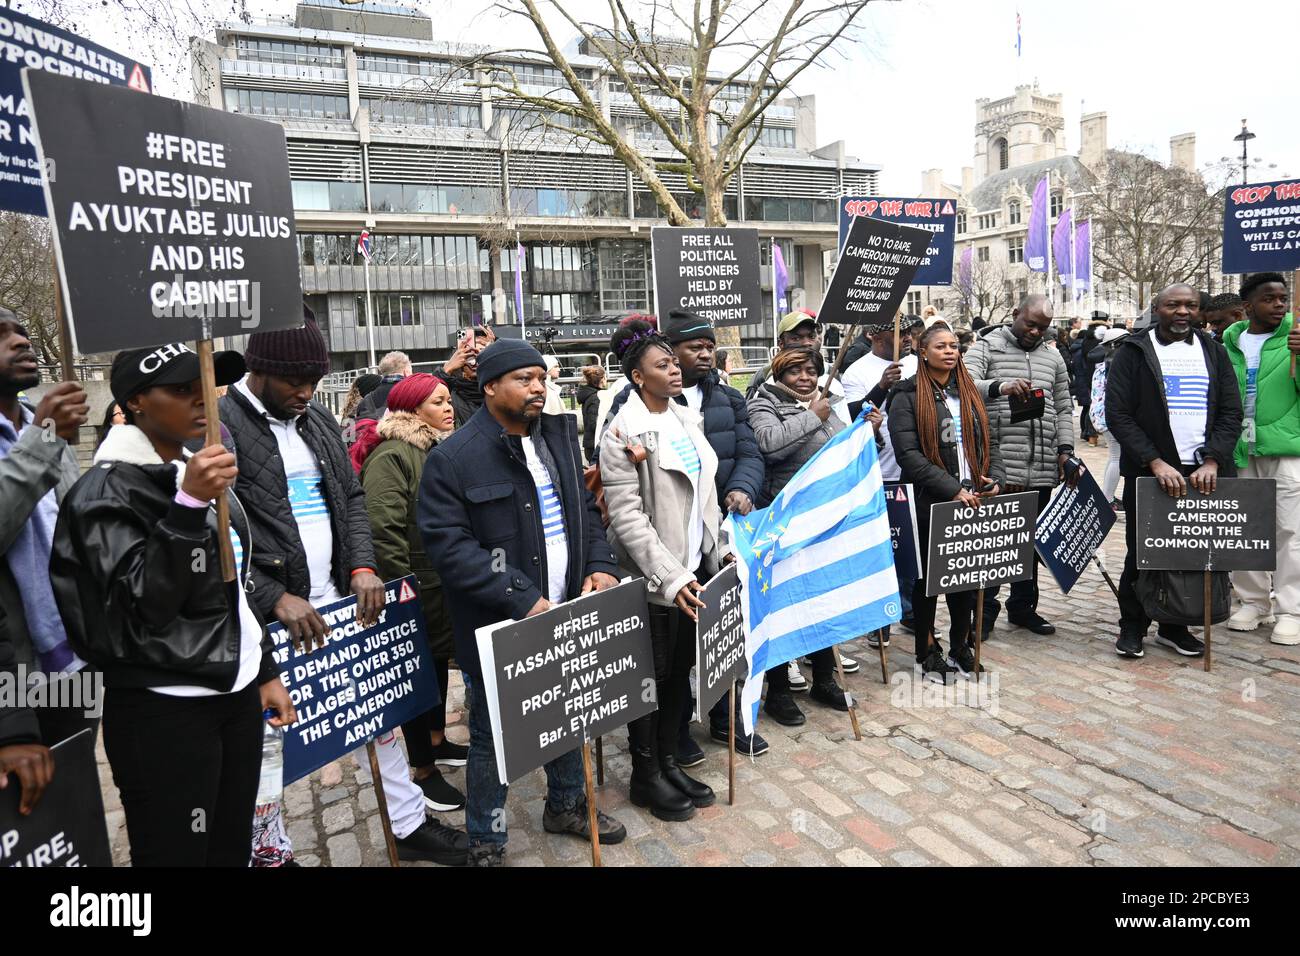 Westminster, London, UK. 13th March 2023. Cameroons community protest during His Majesty, King Charles III and Her Majesty Camilla - Stop colonization of former British Cameroons divided the South and the killing of Cameroons London, UK. Credit: See Li/Picture Capital/Alamy Live News Stock Photo